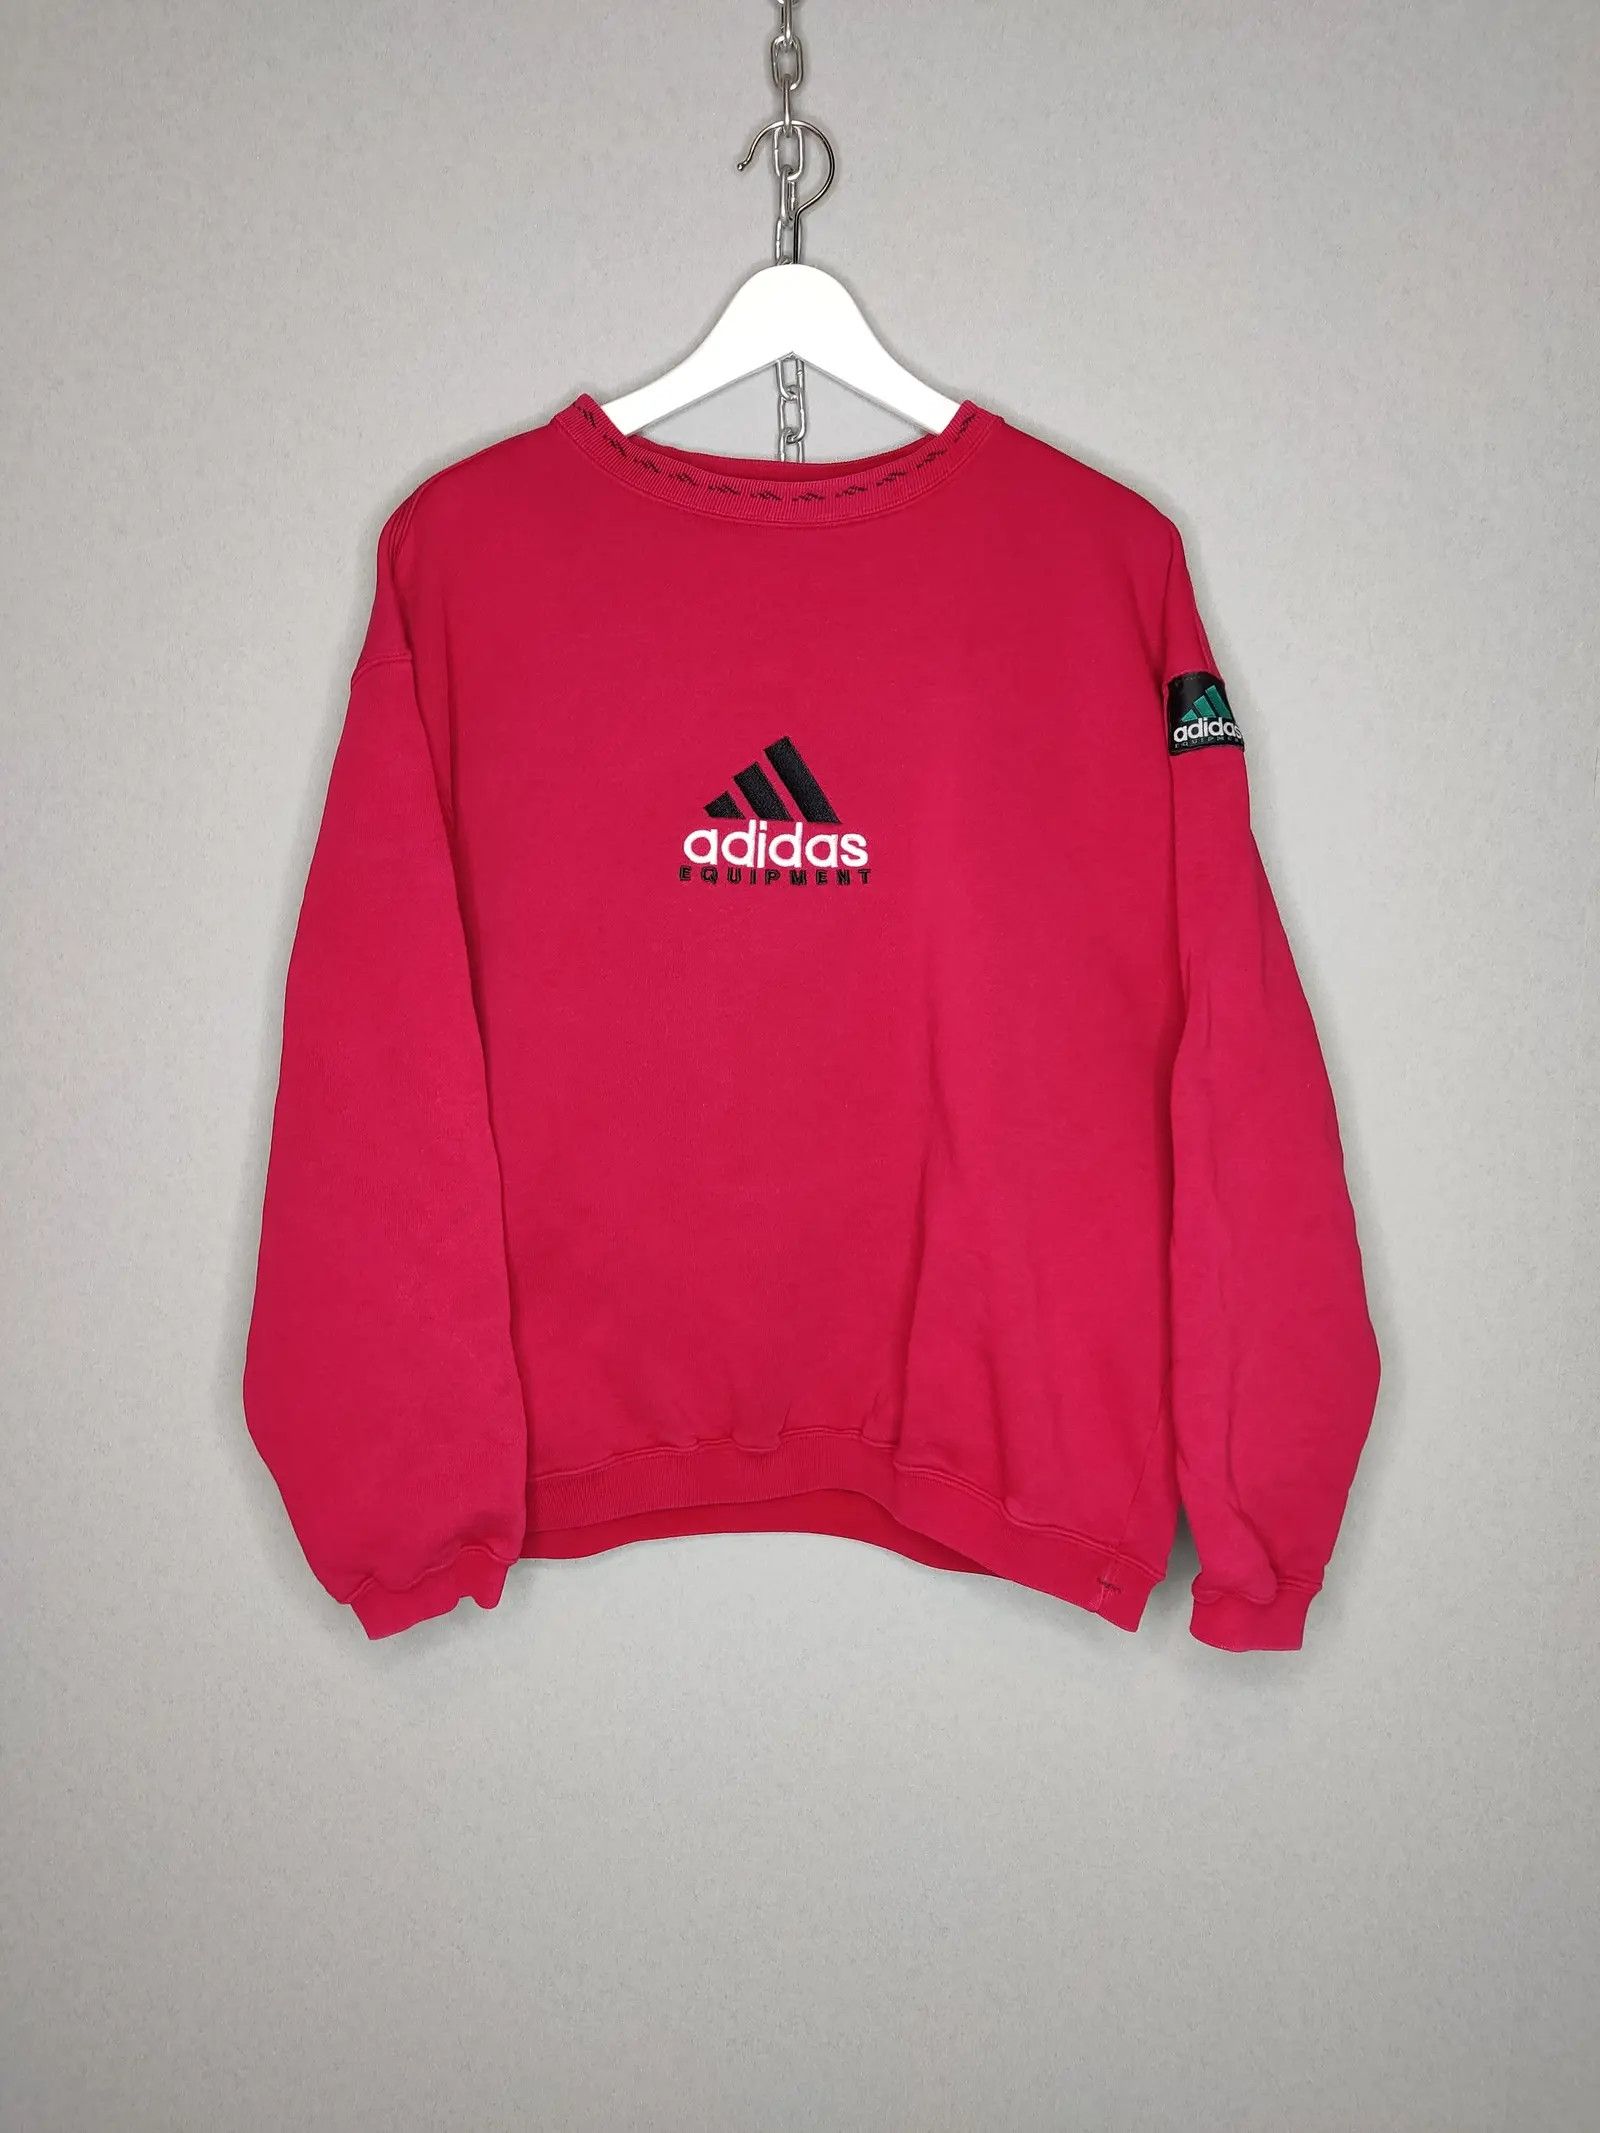 Pre-owned Adidas X Vintage Adidas Equipment Vintage Sweatshirt Embroidered Logo In Red